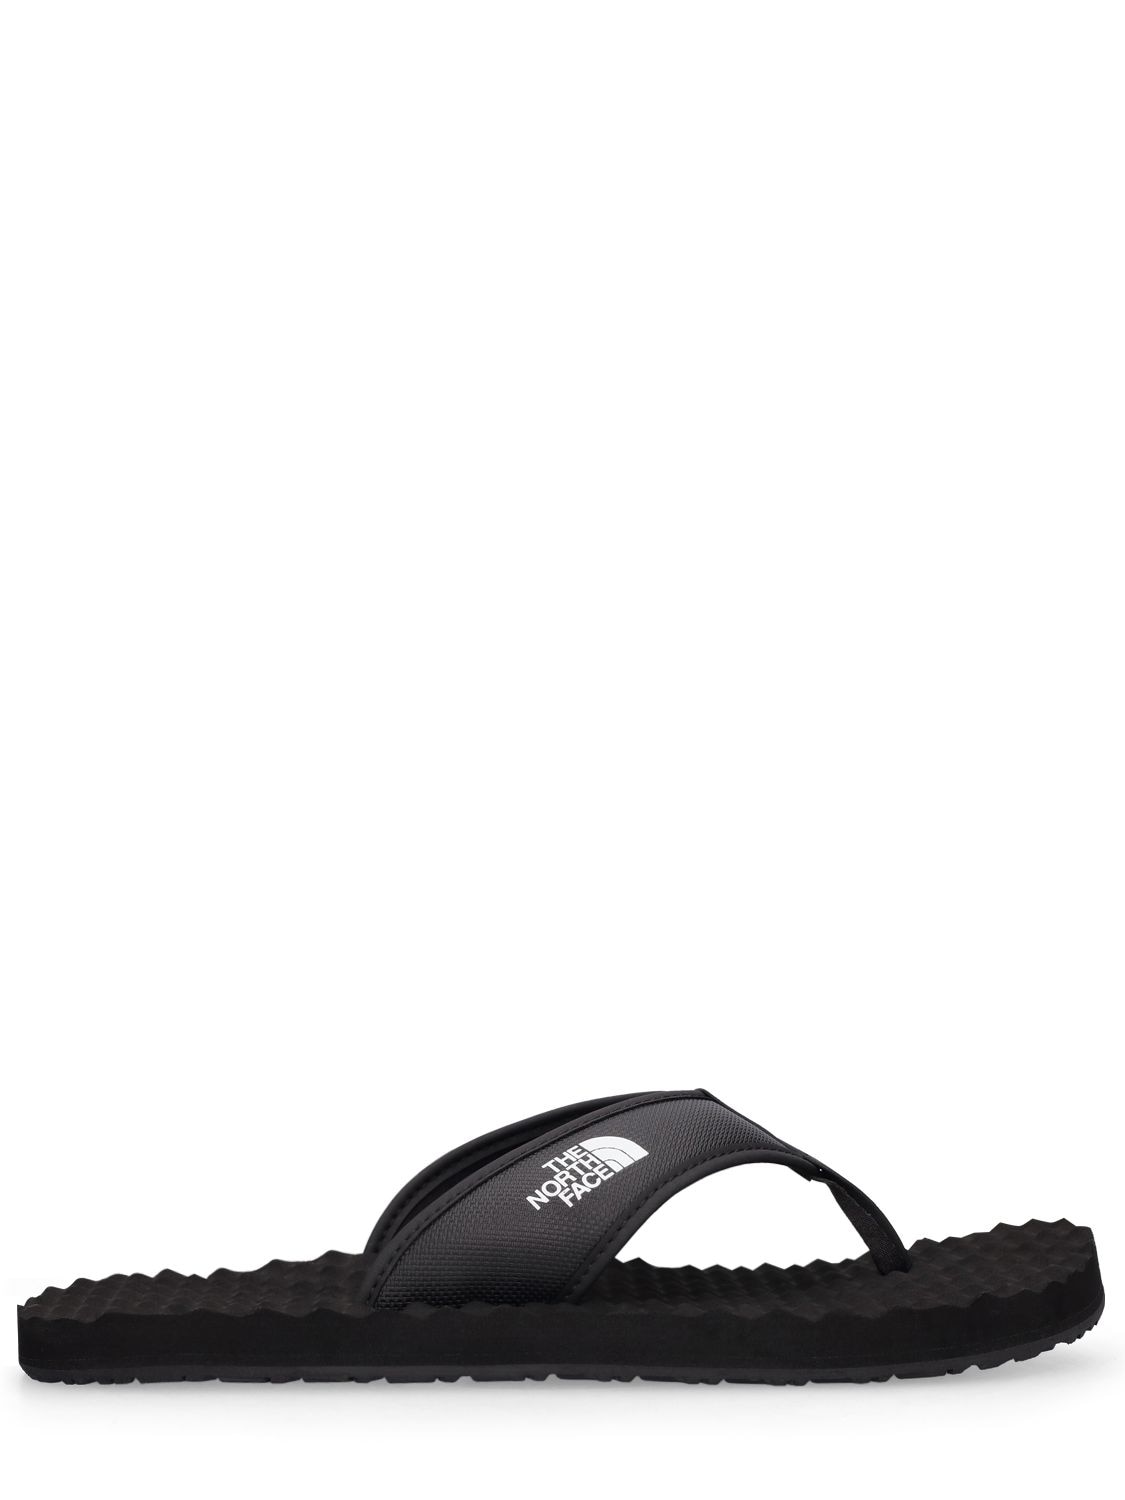 THE NORTH FACE BASE CAMP FLIP-FLOP II